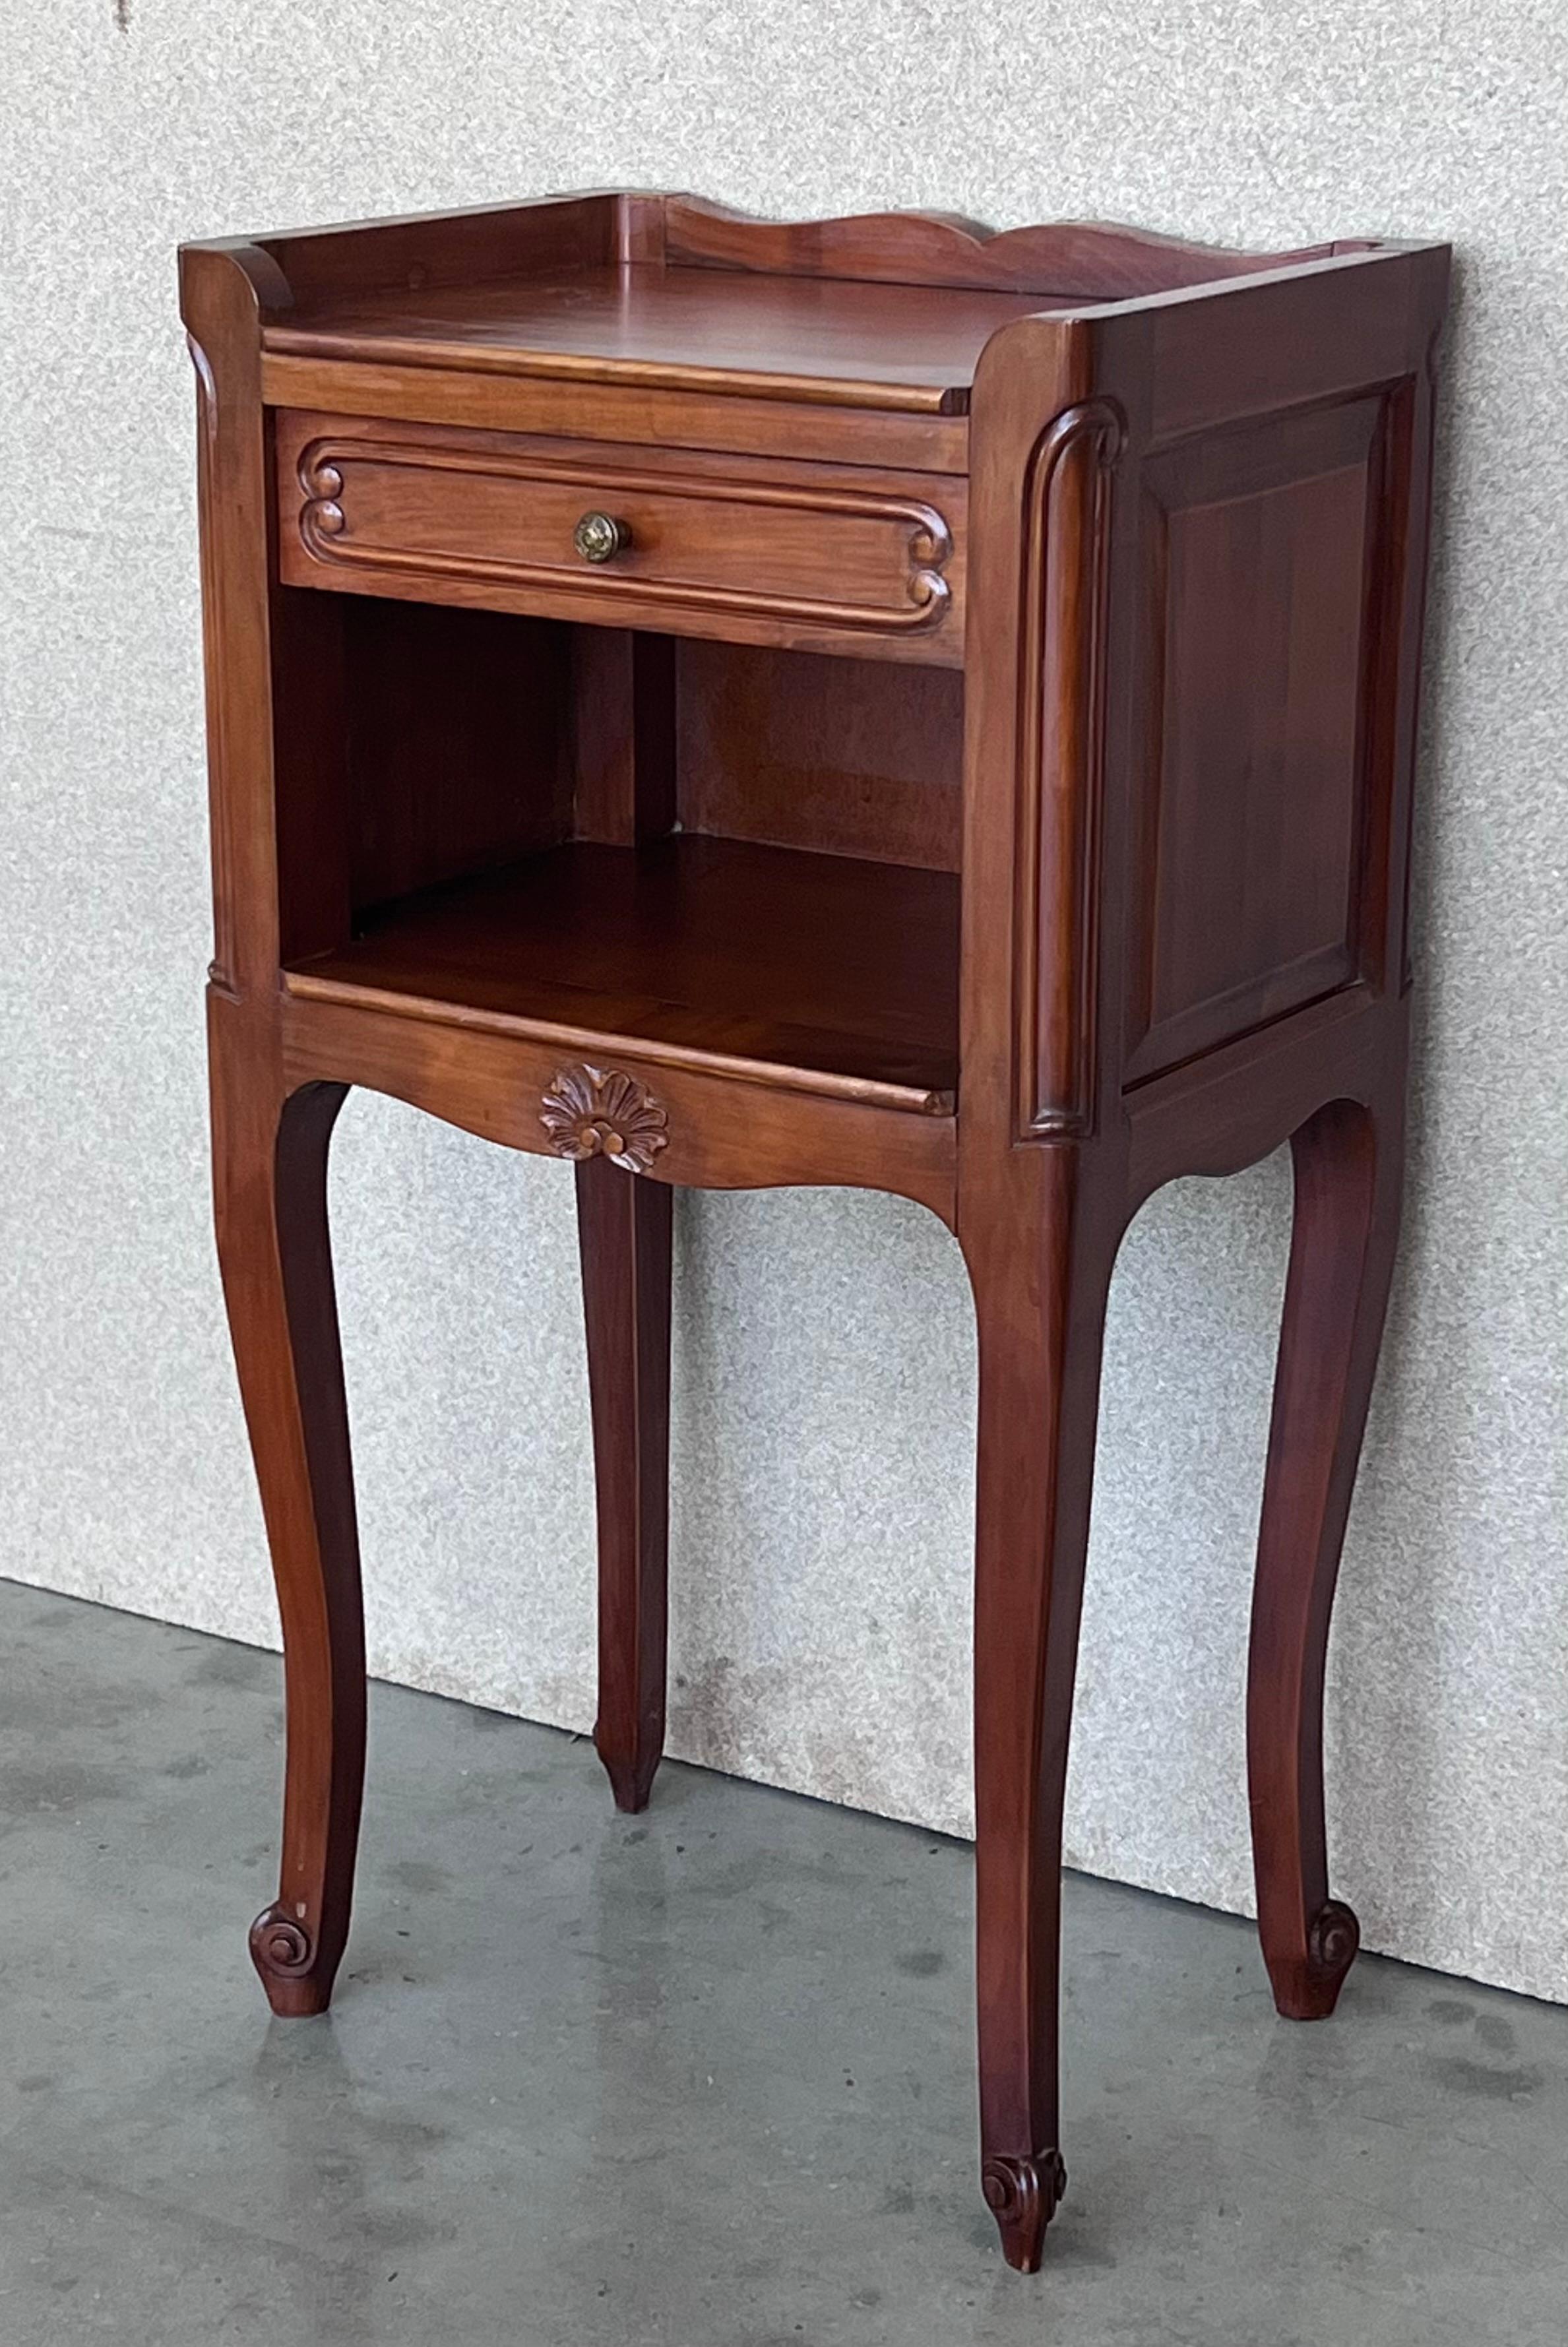 A pretty pair of French one drawer nightstands with open shelf, circa 1910.
Pair of French Louis XV style oak bedside tables from the early 20th century. This pair of French 'tables de chevet' was created in the early years of the 20th century, at